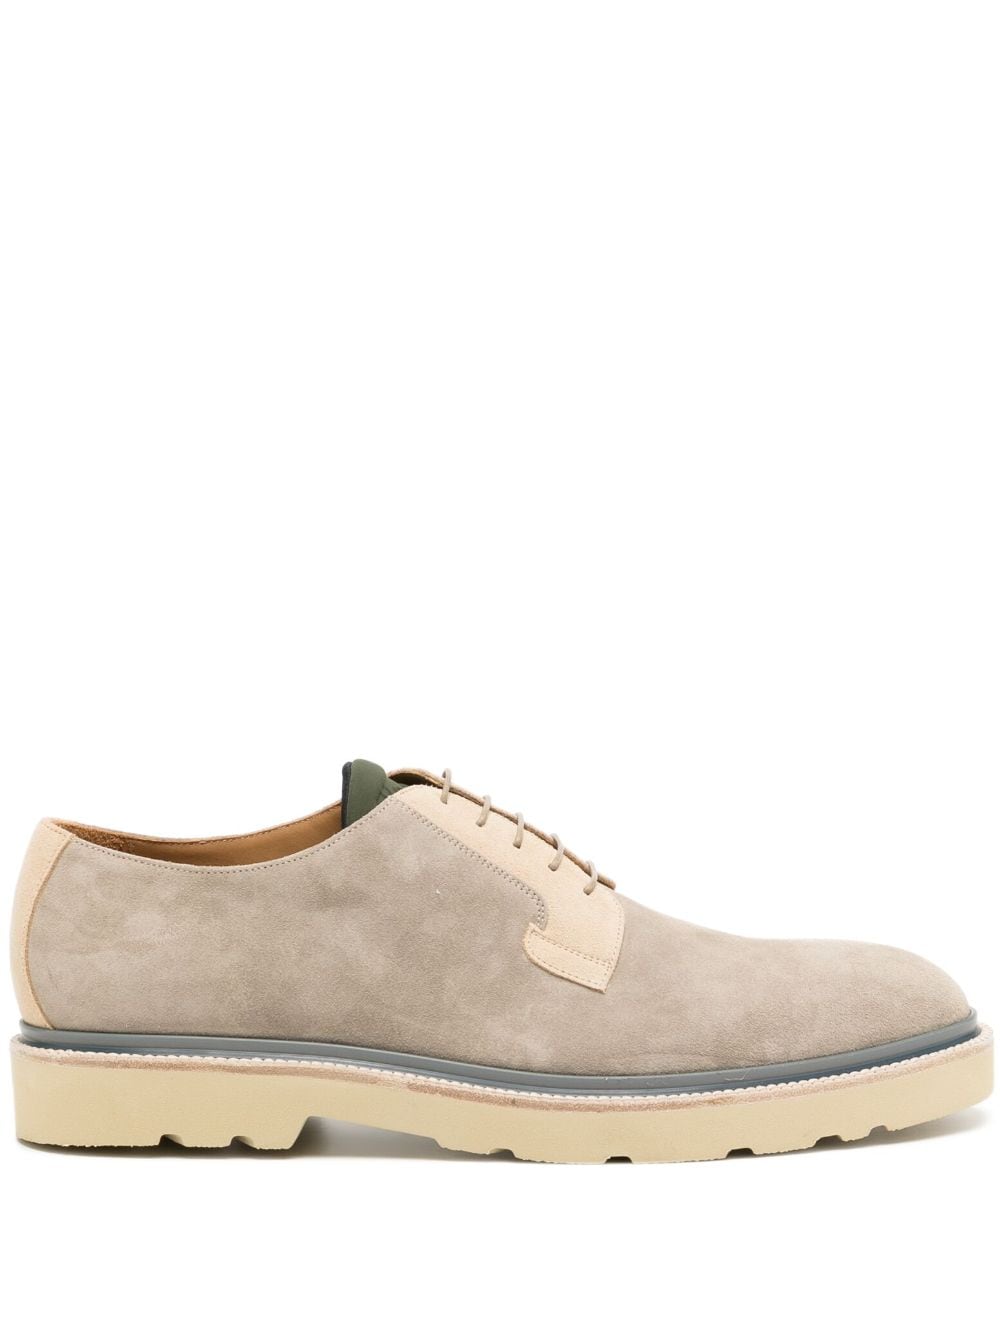 Paul Smith Calf Leather Derby Shoes - Farfetch